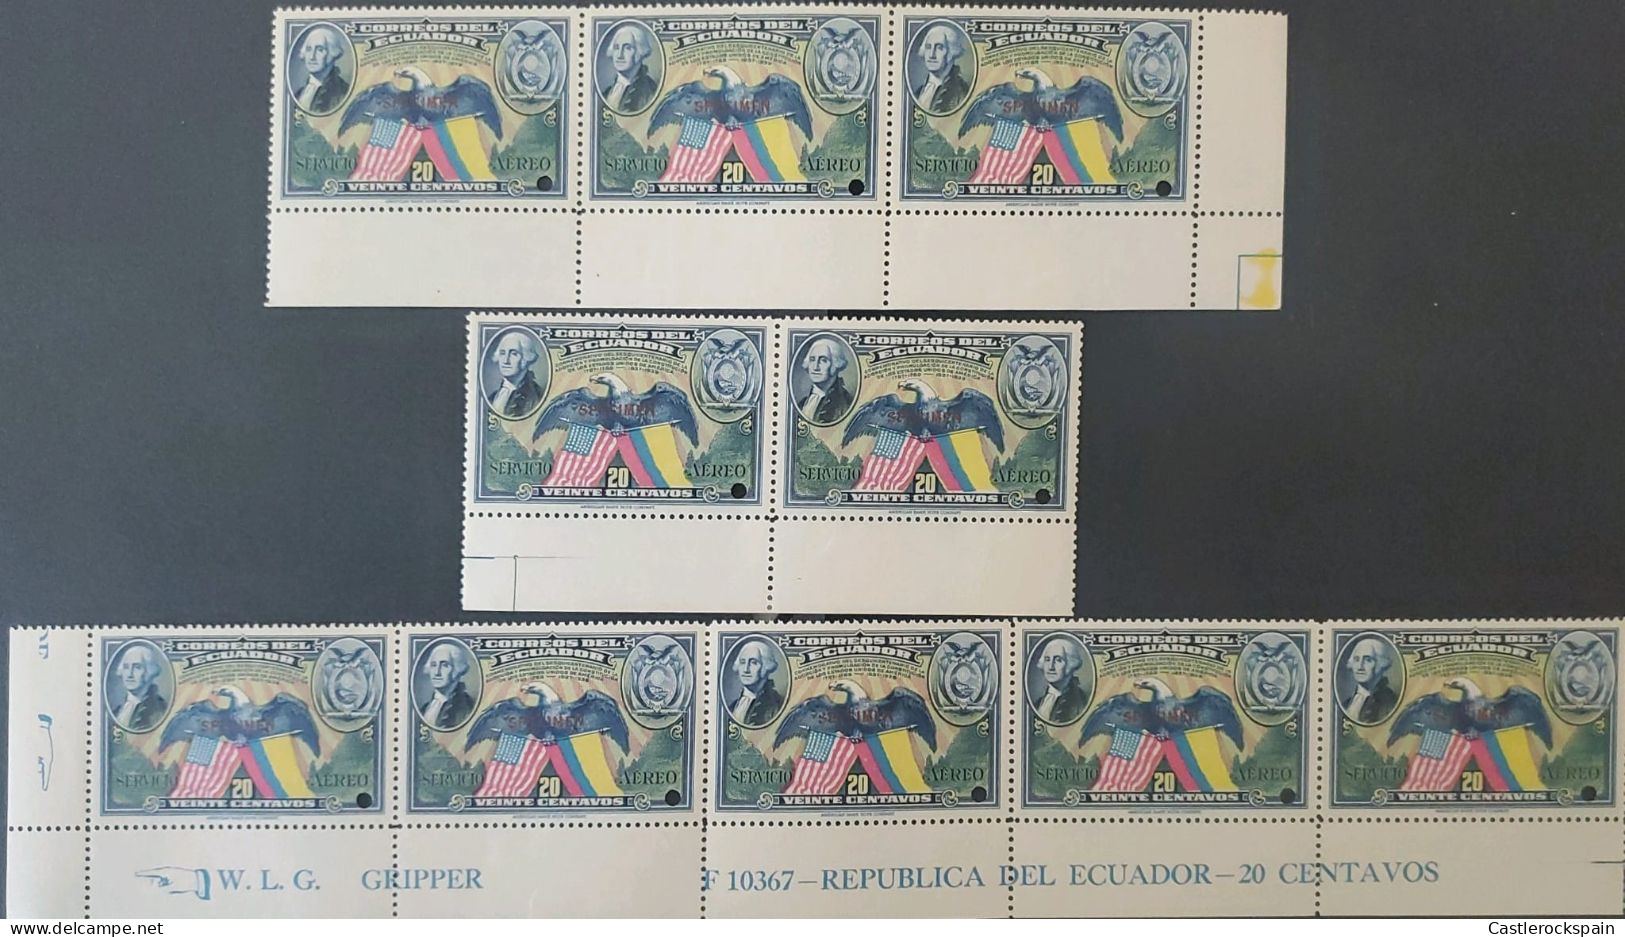 OH) 1938 ECUADOR, PUNCH, PORTRAIT WASHINGTON, AMERICAN EAGLE AND FLAGS,  GRIPPER  WITH CONTROL NUMBER, MNH - Equateur